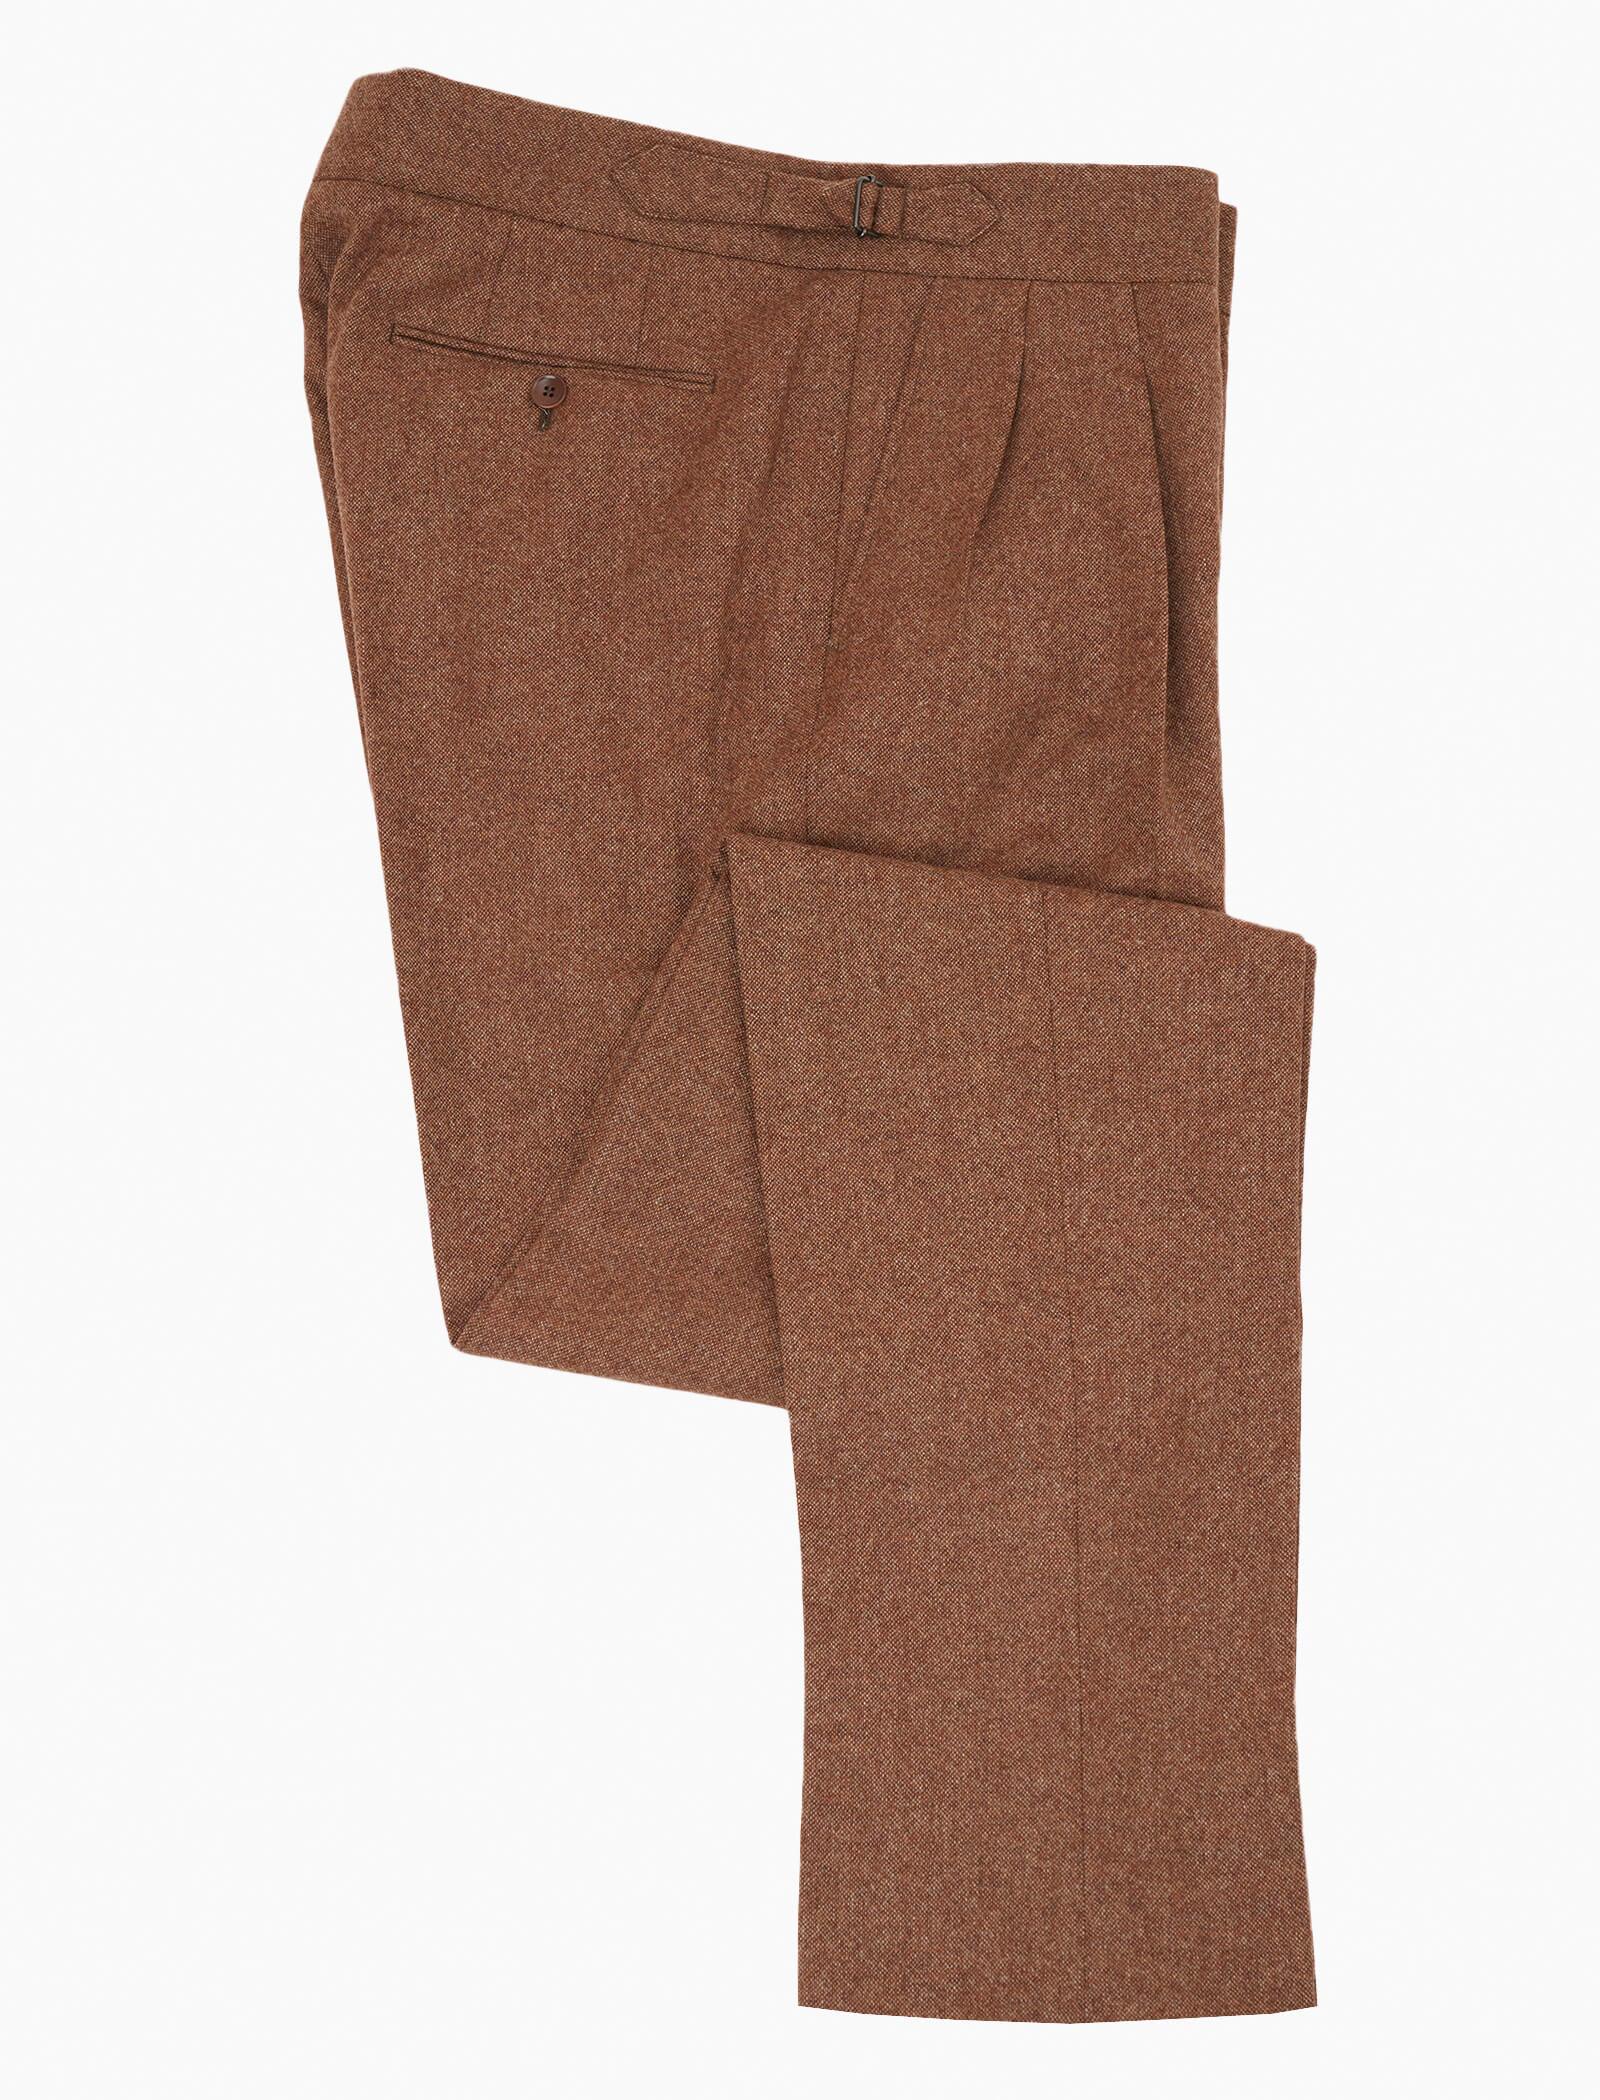 Relaxed Fit Wool-blend Pants - Brown/houndstooth-patterned - Men | H&M US